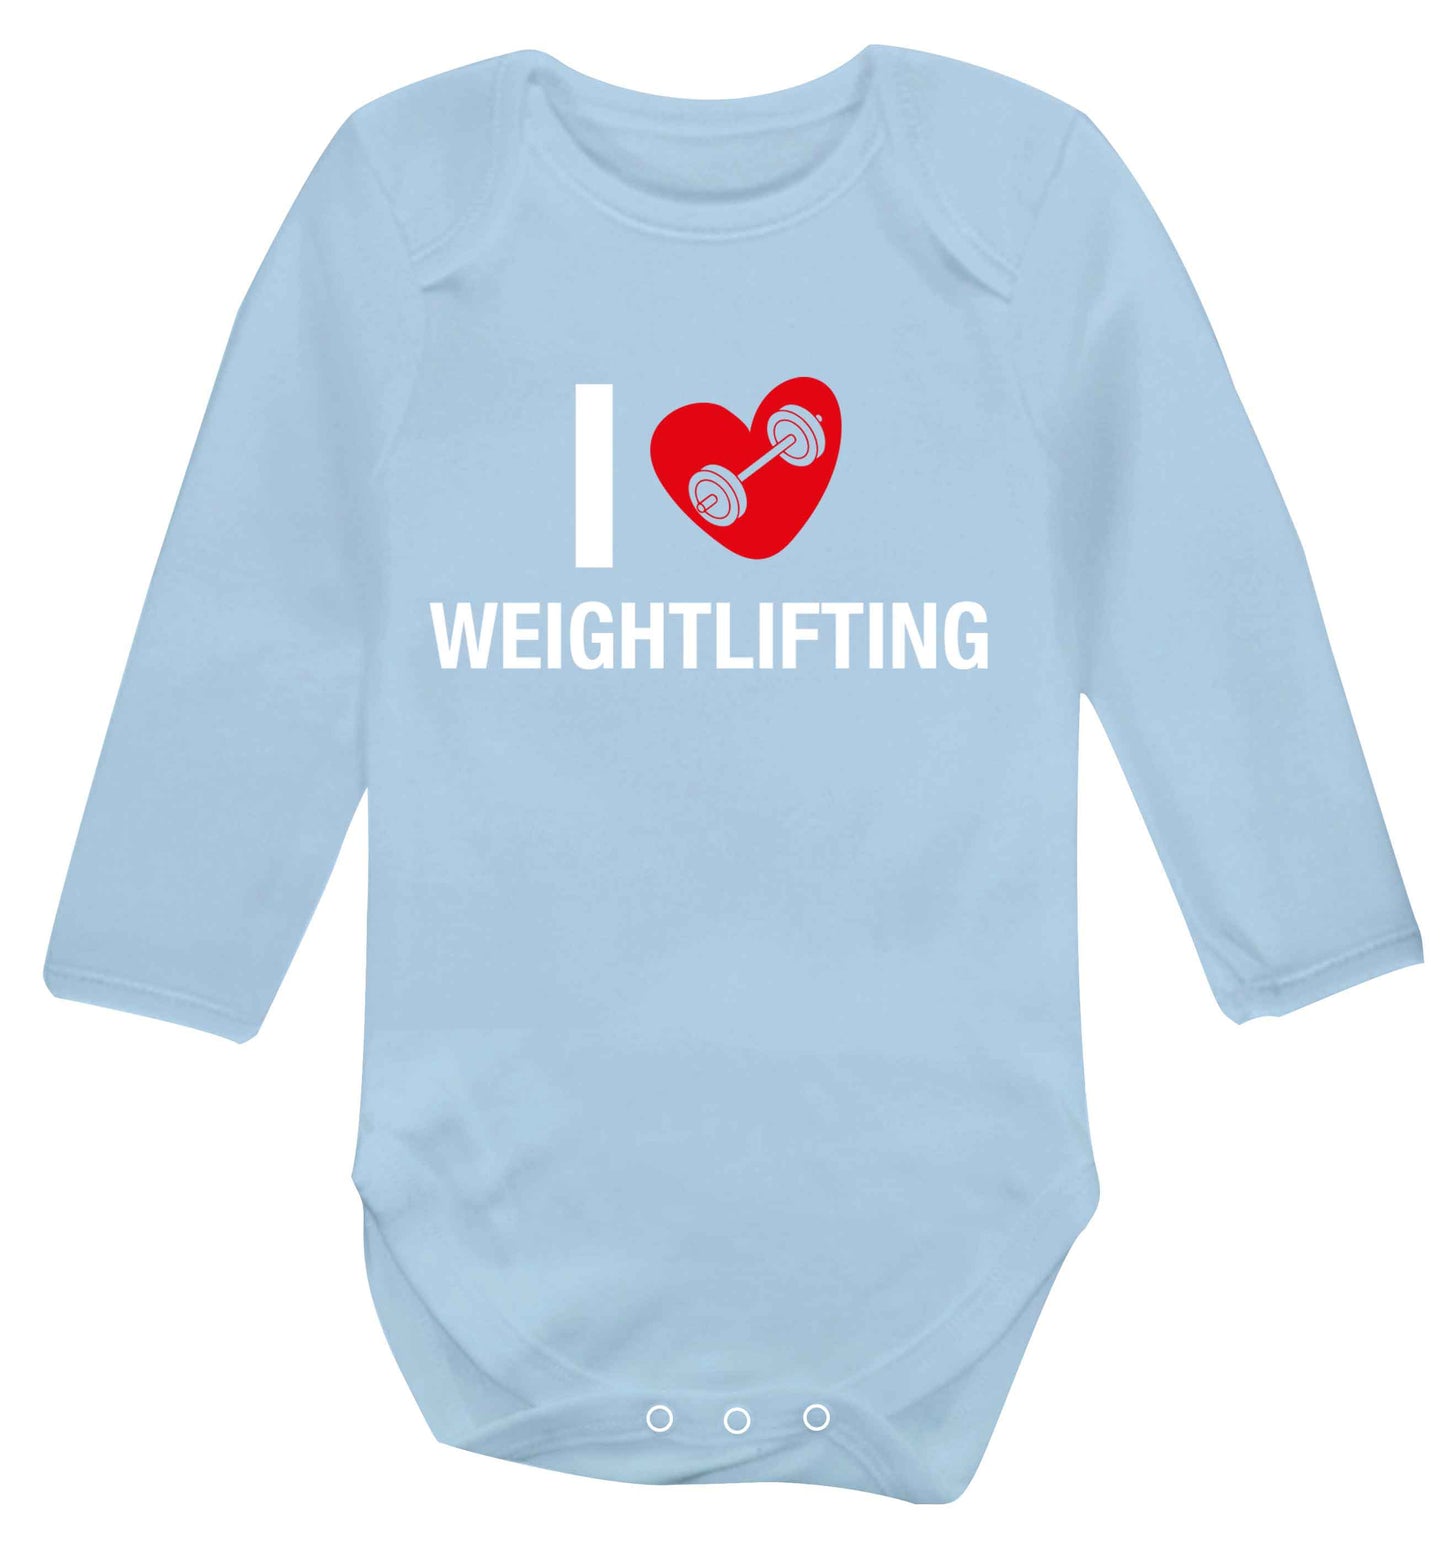 I love weightlifting Baby Vest long sleeved pale blue 6-12 months